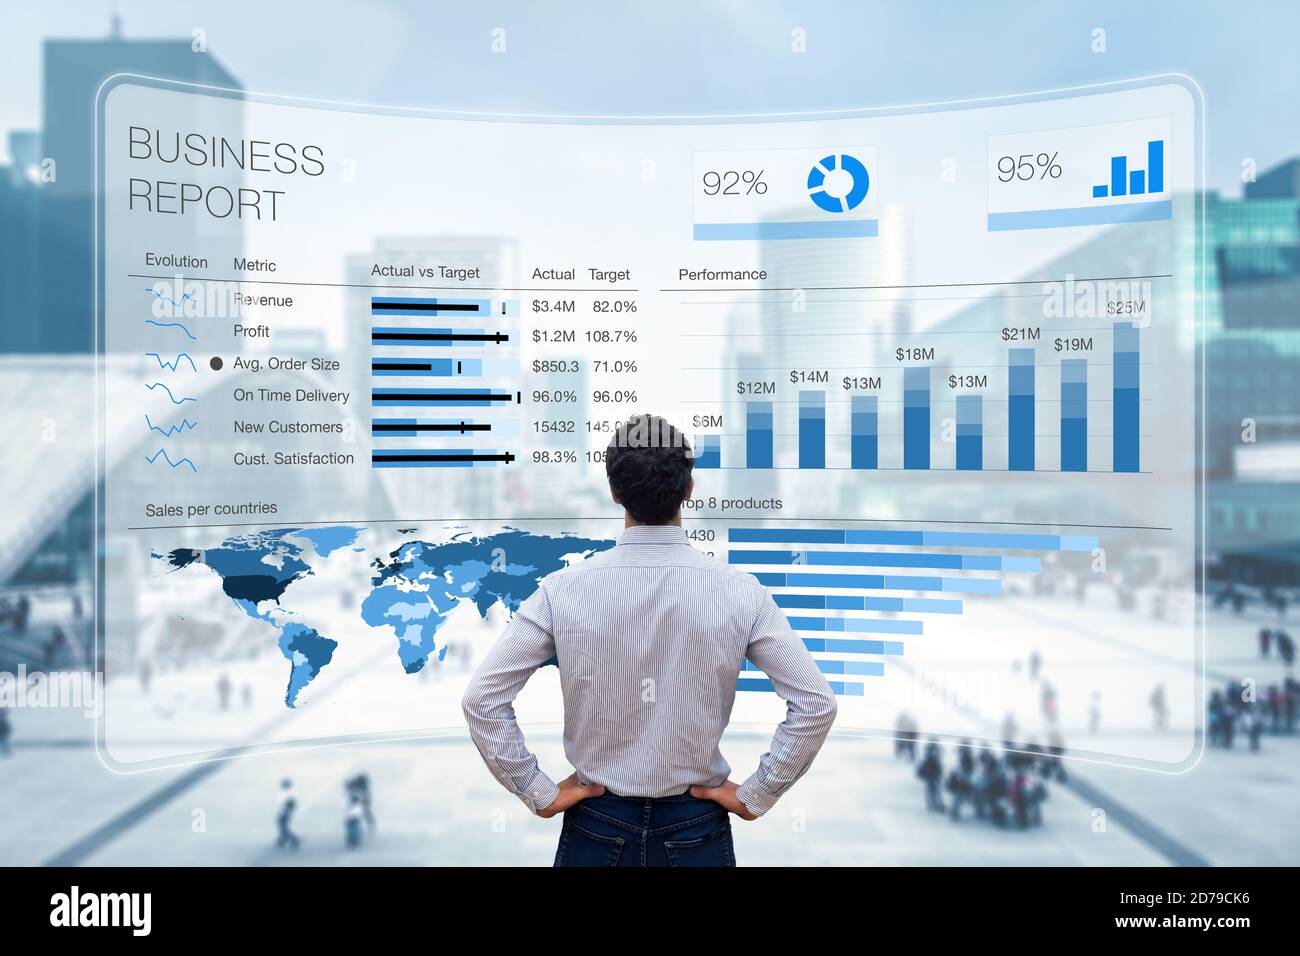 Business report with metrics, performance indicators and charts summarizing sales and profit data compared to targets and market trends. Business exec Stock Photo